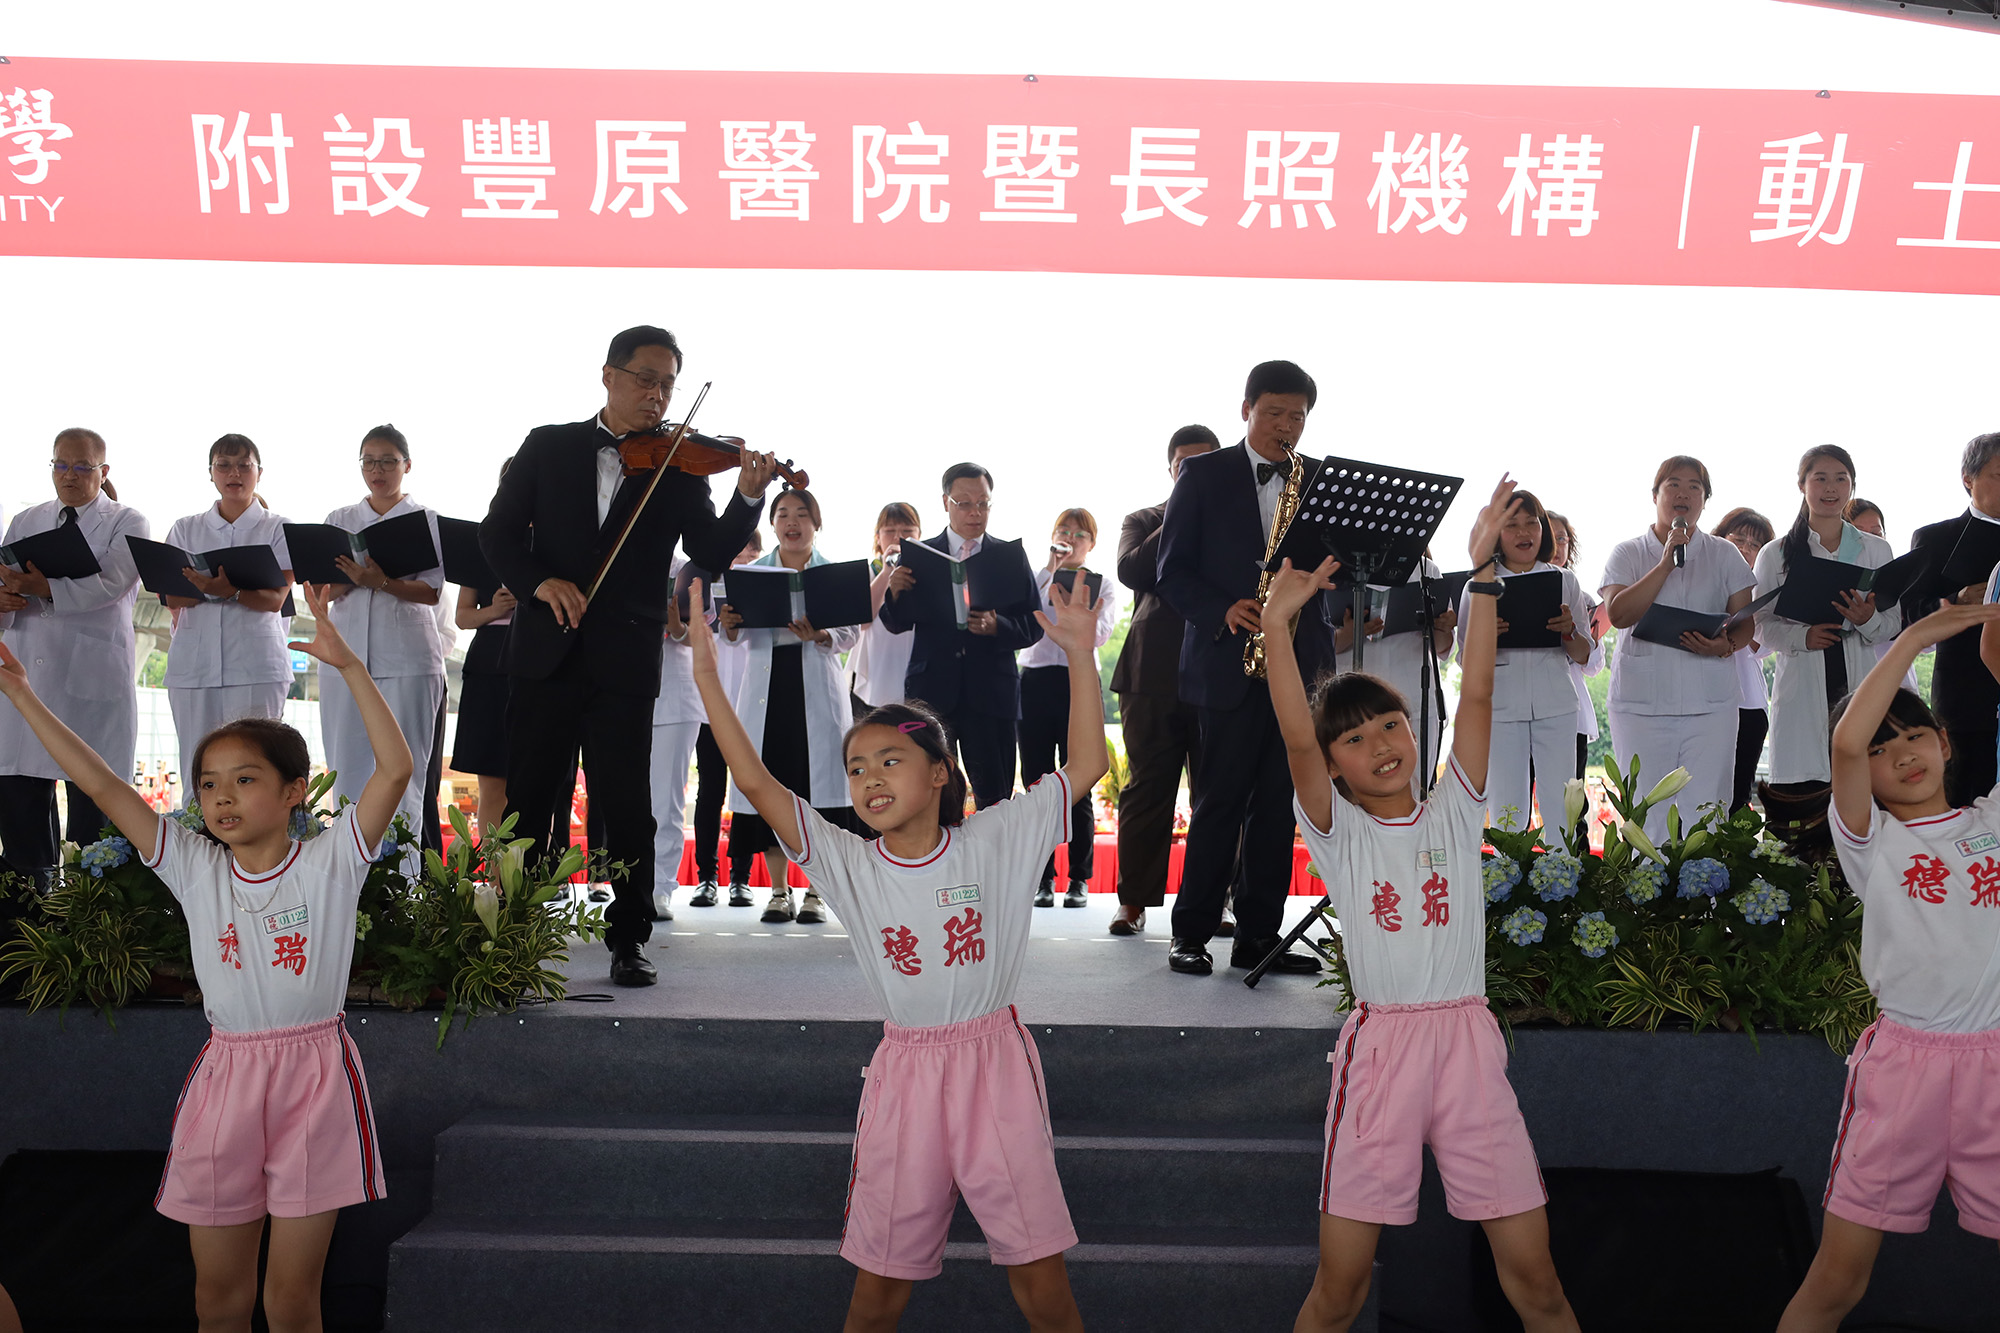 The groundbreaking ceremony of the "Asia University Fengfu Health Park," featuring President Jeffrey J.P. Tsai of Asia University (middle back), Director Feng-Yuan Chang of the Economic Development Bureau of Taichung City (left middle), Director Tzu-Chan Tseng of the Health Bureau of Taichung City (right middle), and elementary school children from Ruisui singing "I Believe" together